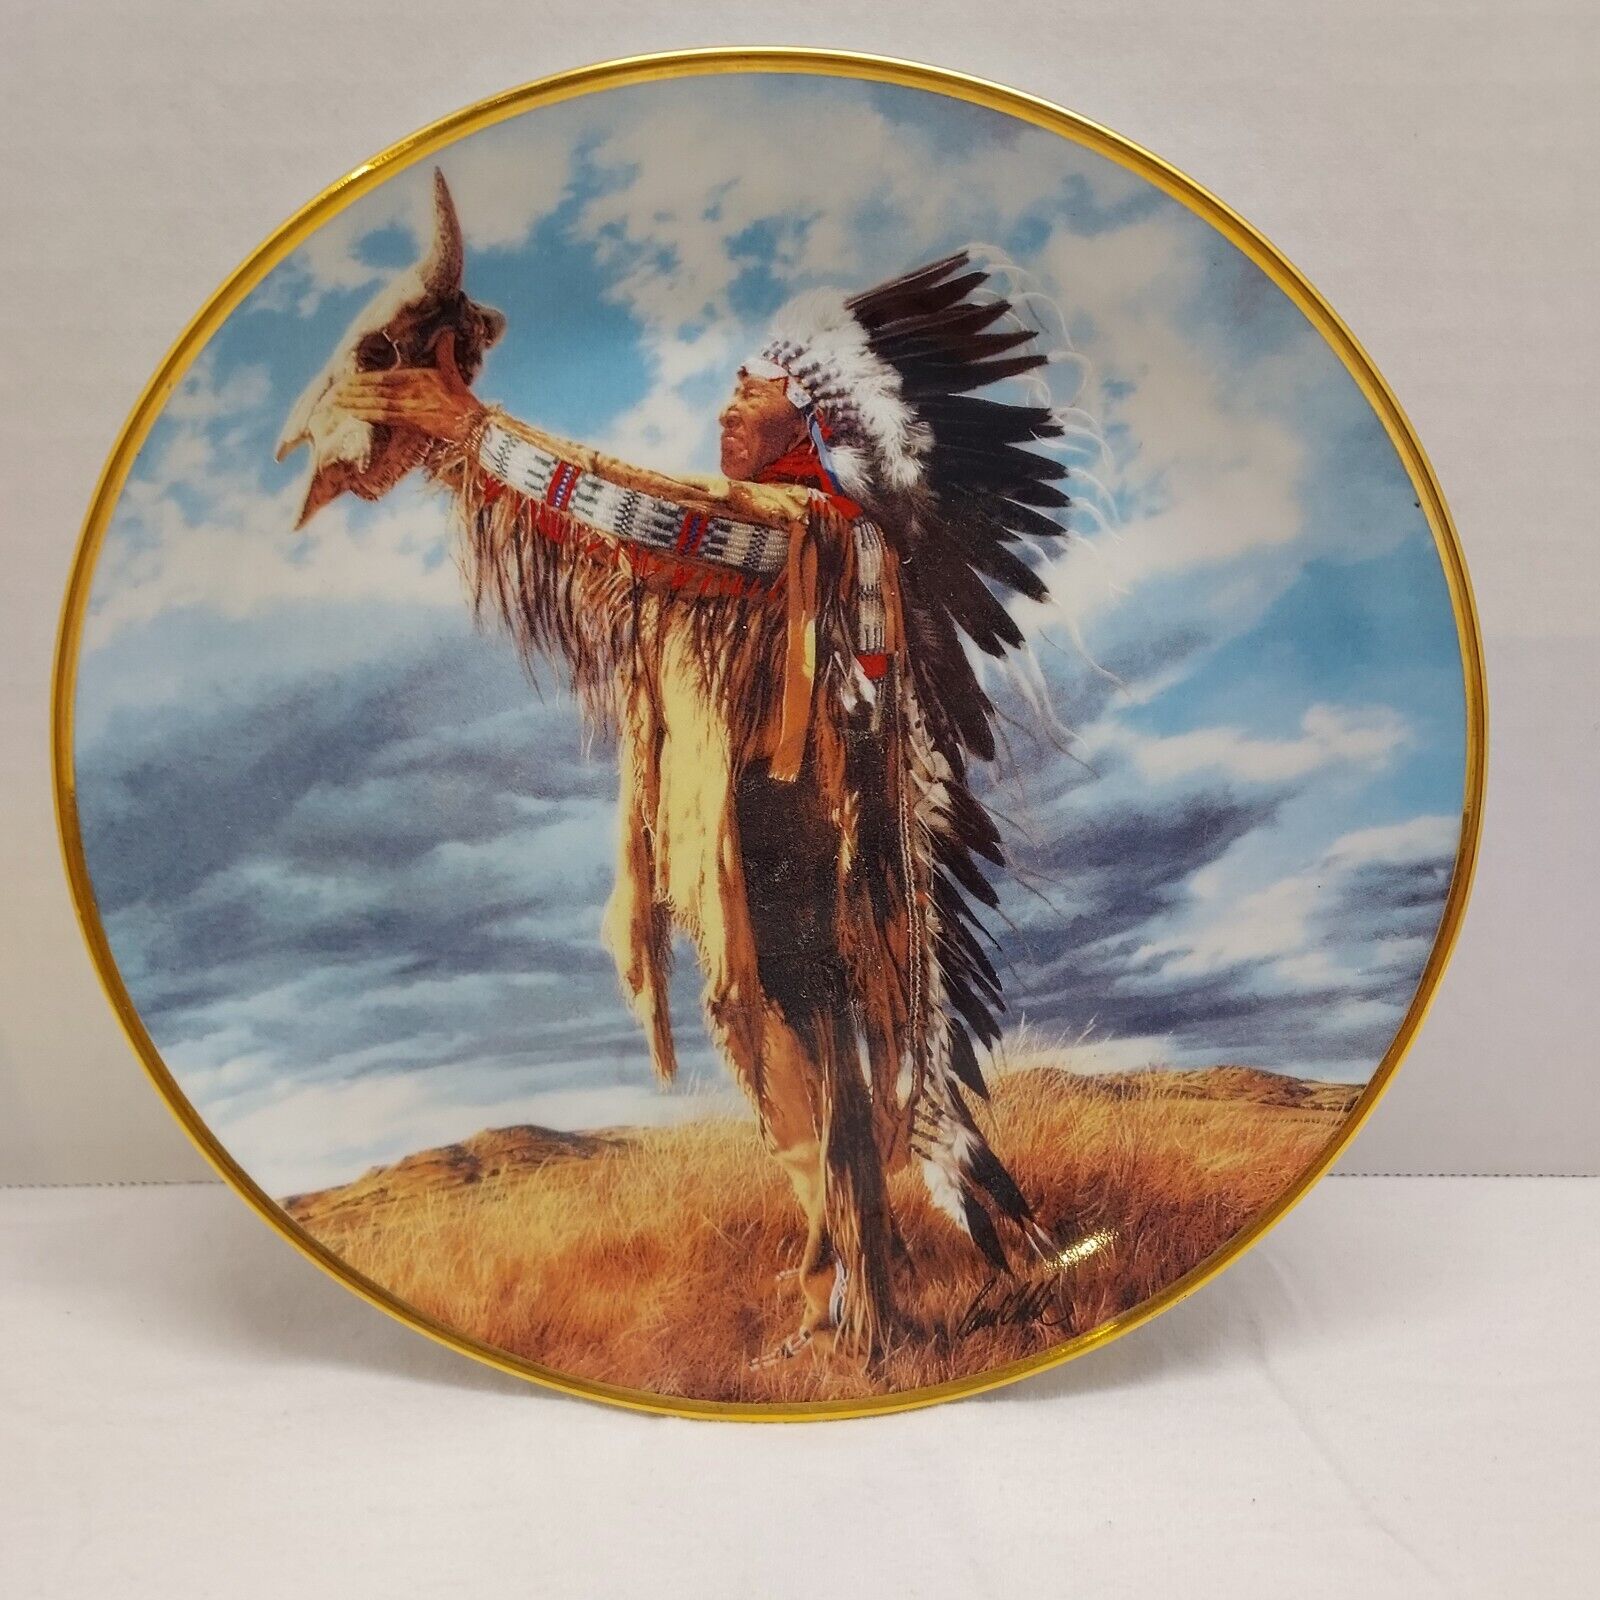 Prayer To The Great Spirit American Indian Heritage Museum Plate By Paul Calle